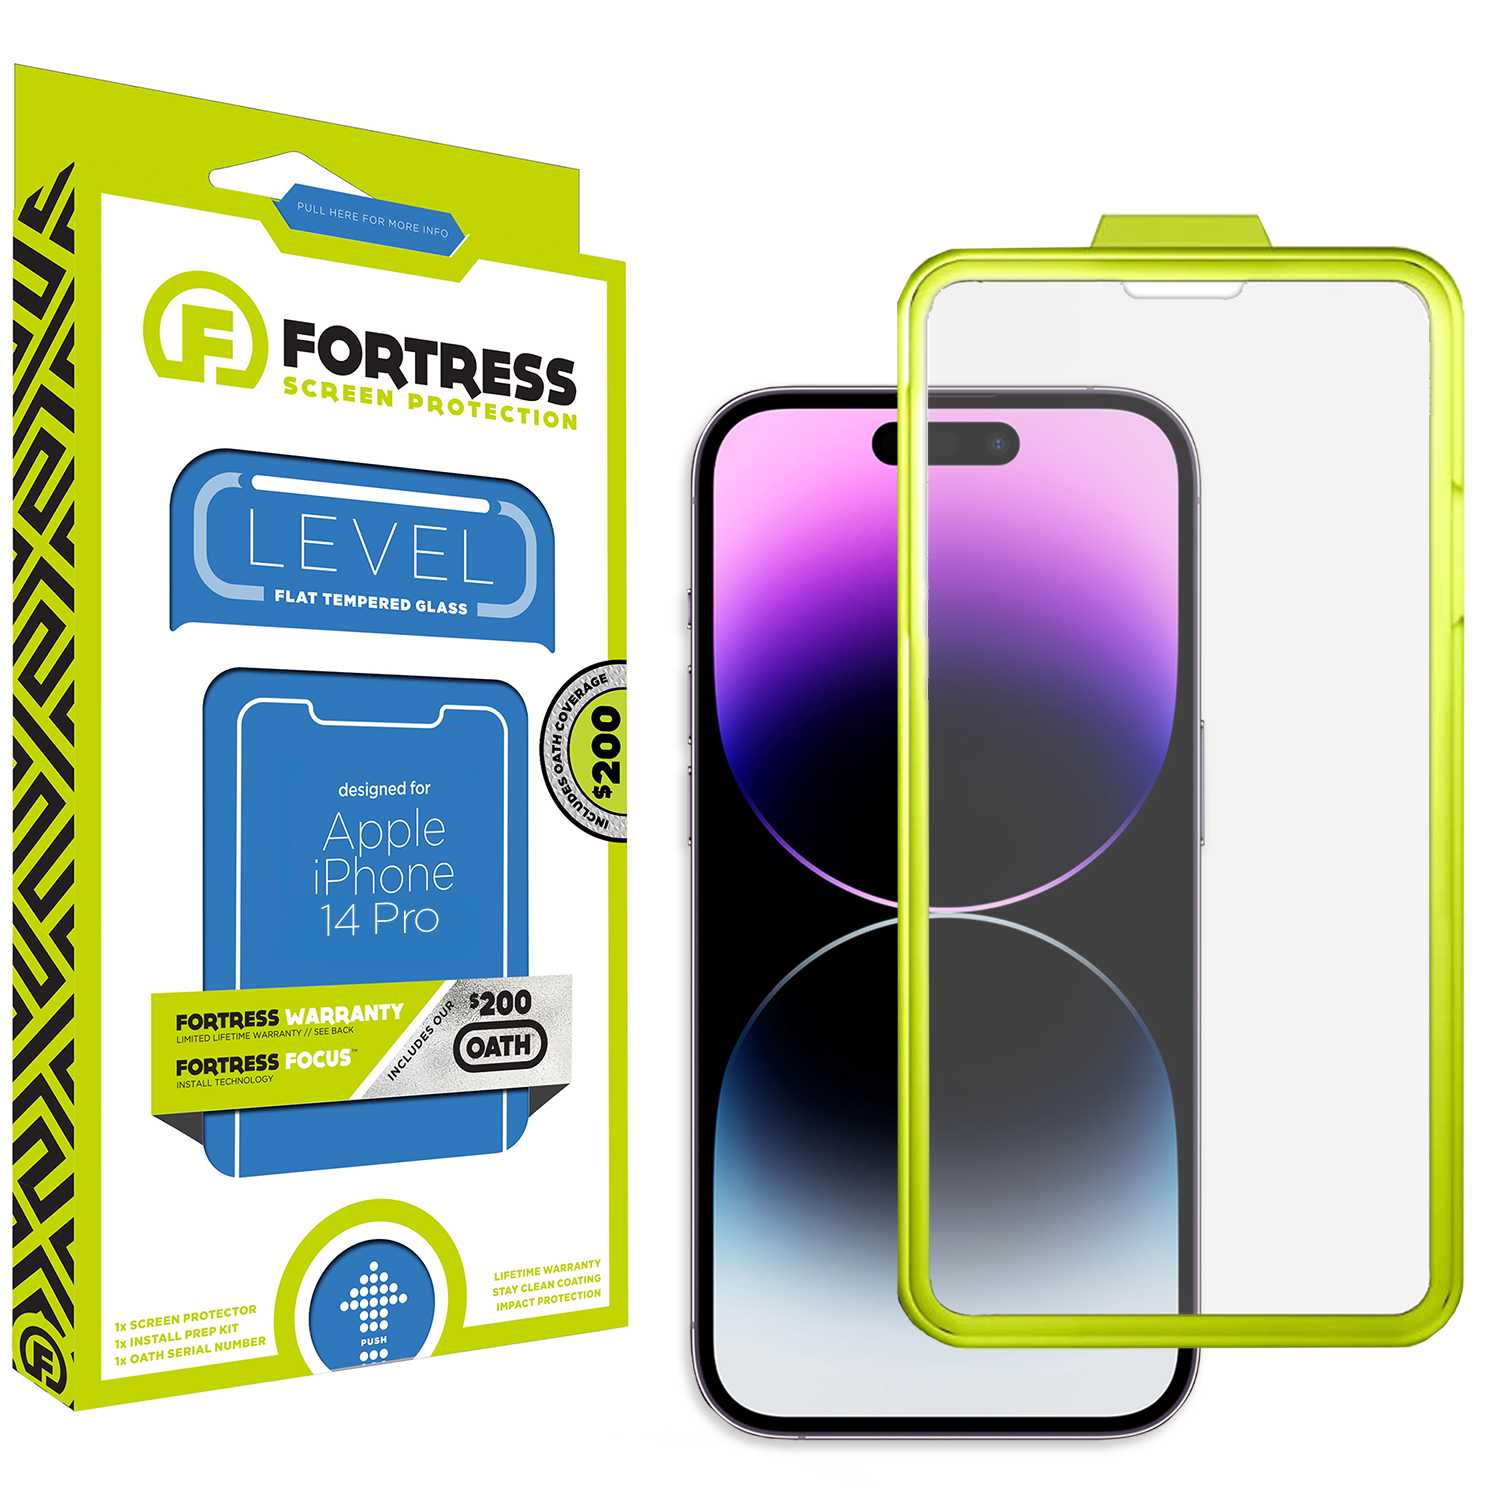 Fortress iPhone 14 Pro Screen Protector - $200 Protection  Scooch Screen Protector